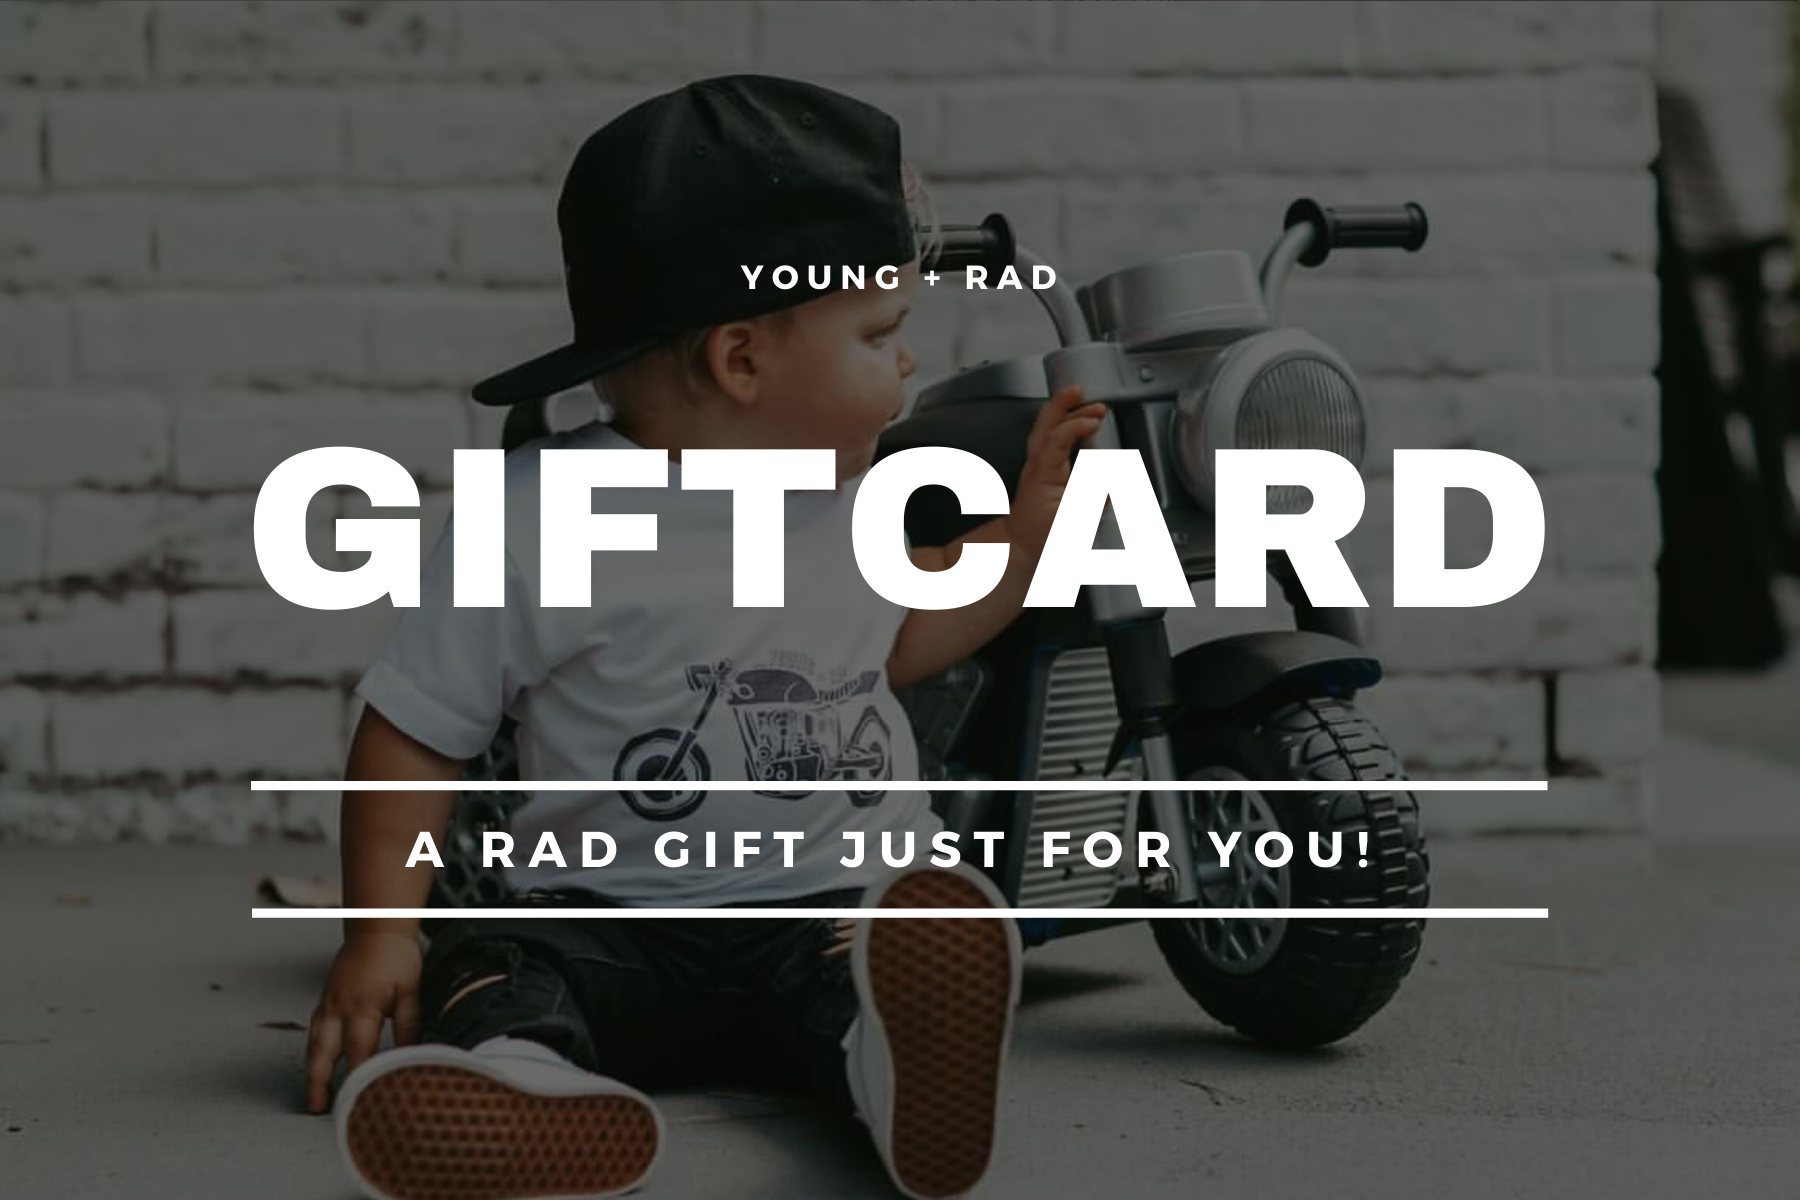 YOUNG + RAD GIFT CARD